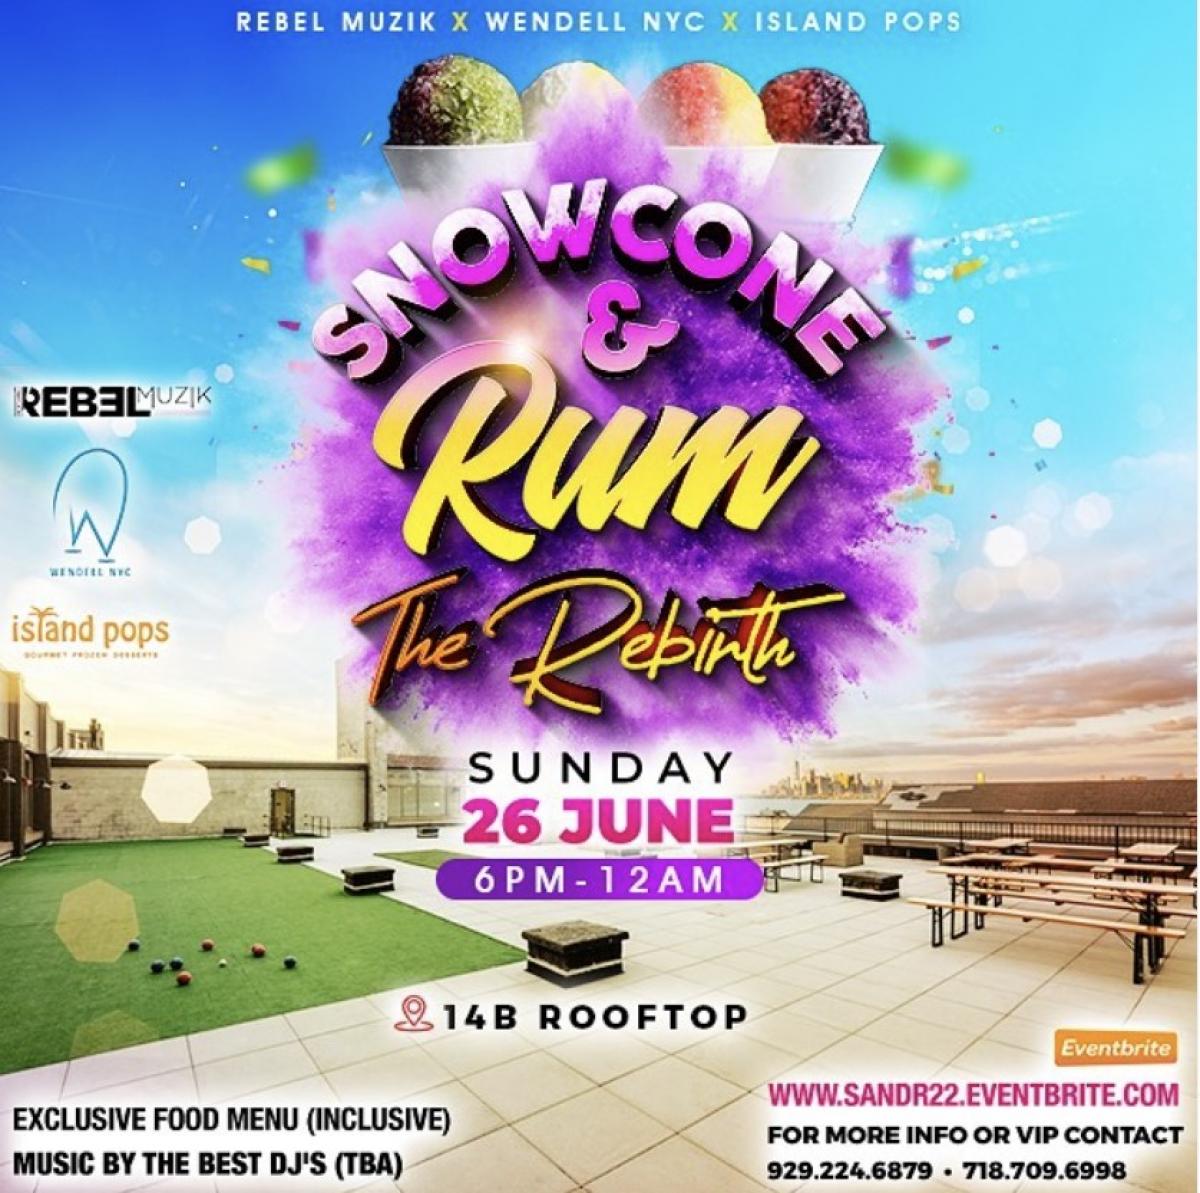 Snowcone and Rum  flyer or graphic.